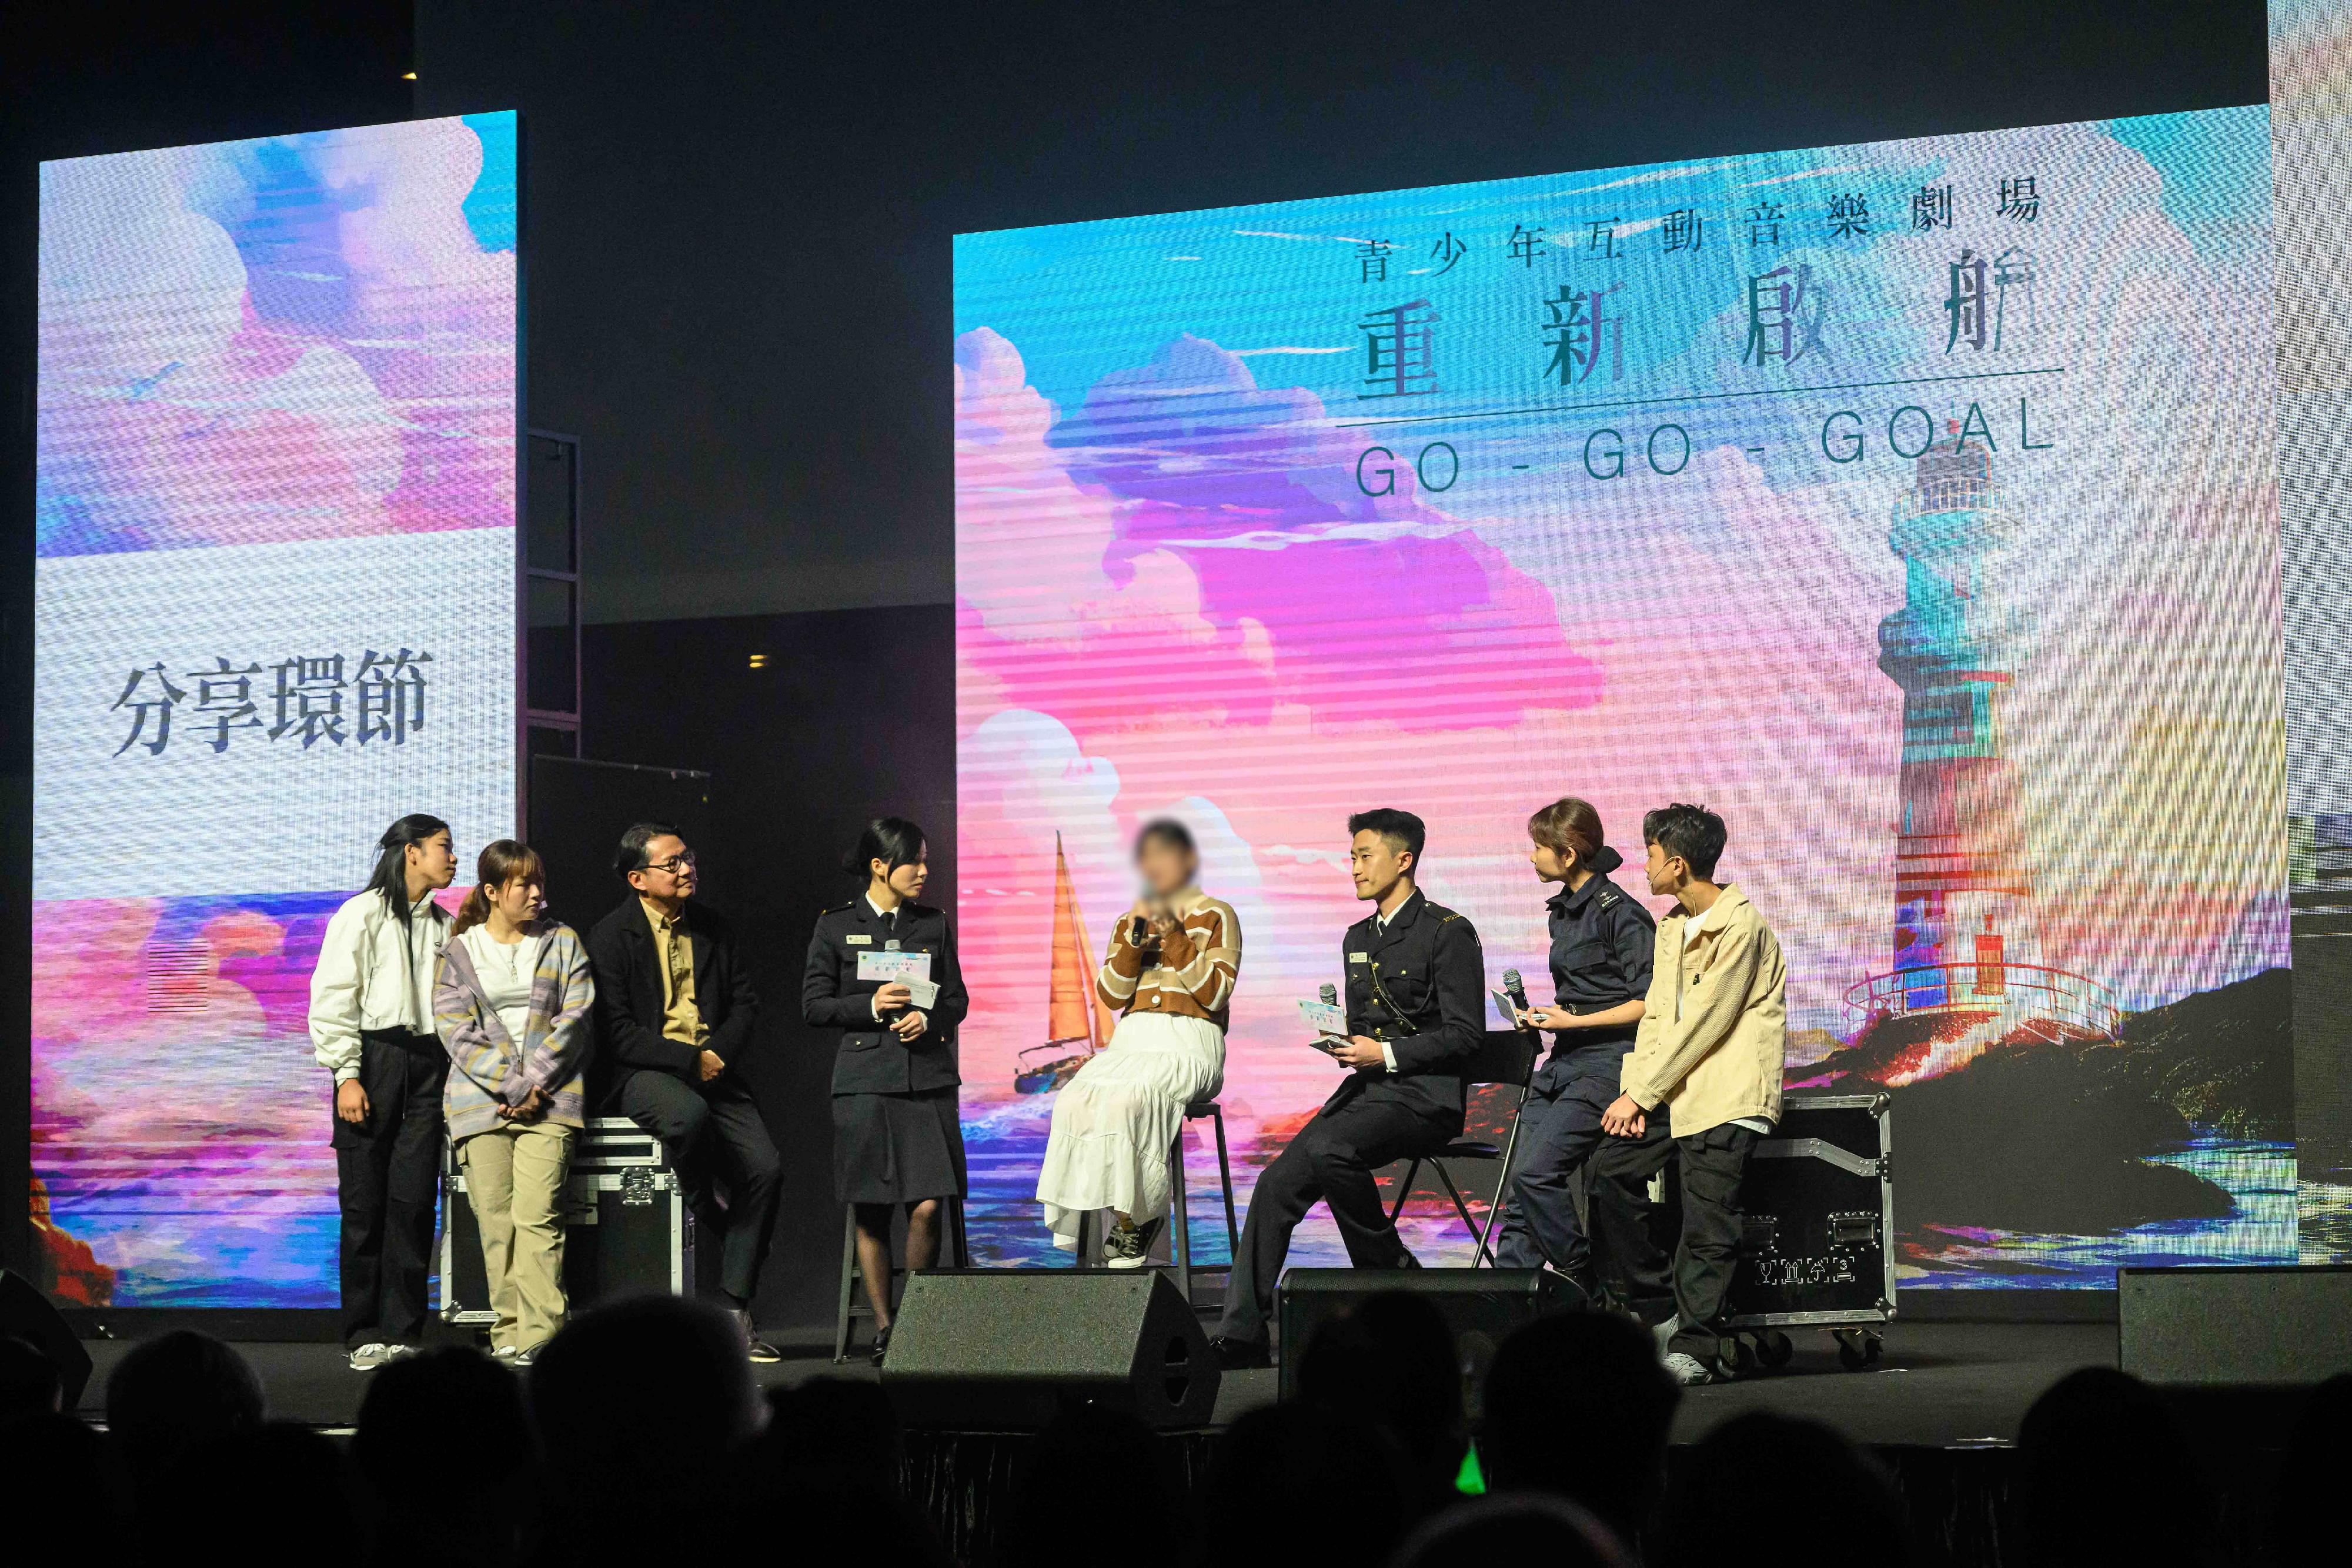 The Correctional Services Department and the Chinese Manufacturers' Association of Hong Kong jointly organised a youth musical drama, "Life Revitalisation Go Go Goal!", at Queen Elizabeth Stadium today (January 26) to promote law-abiding and rehabilitation messages. Photo shows a rehabilitated person talking about the heavy price she had paid for committing crime and sharing her journey of rehabilitation with the support of correctional officers and society.